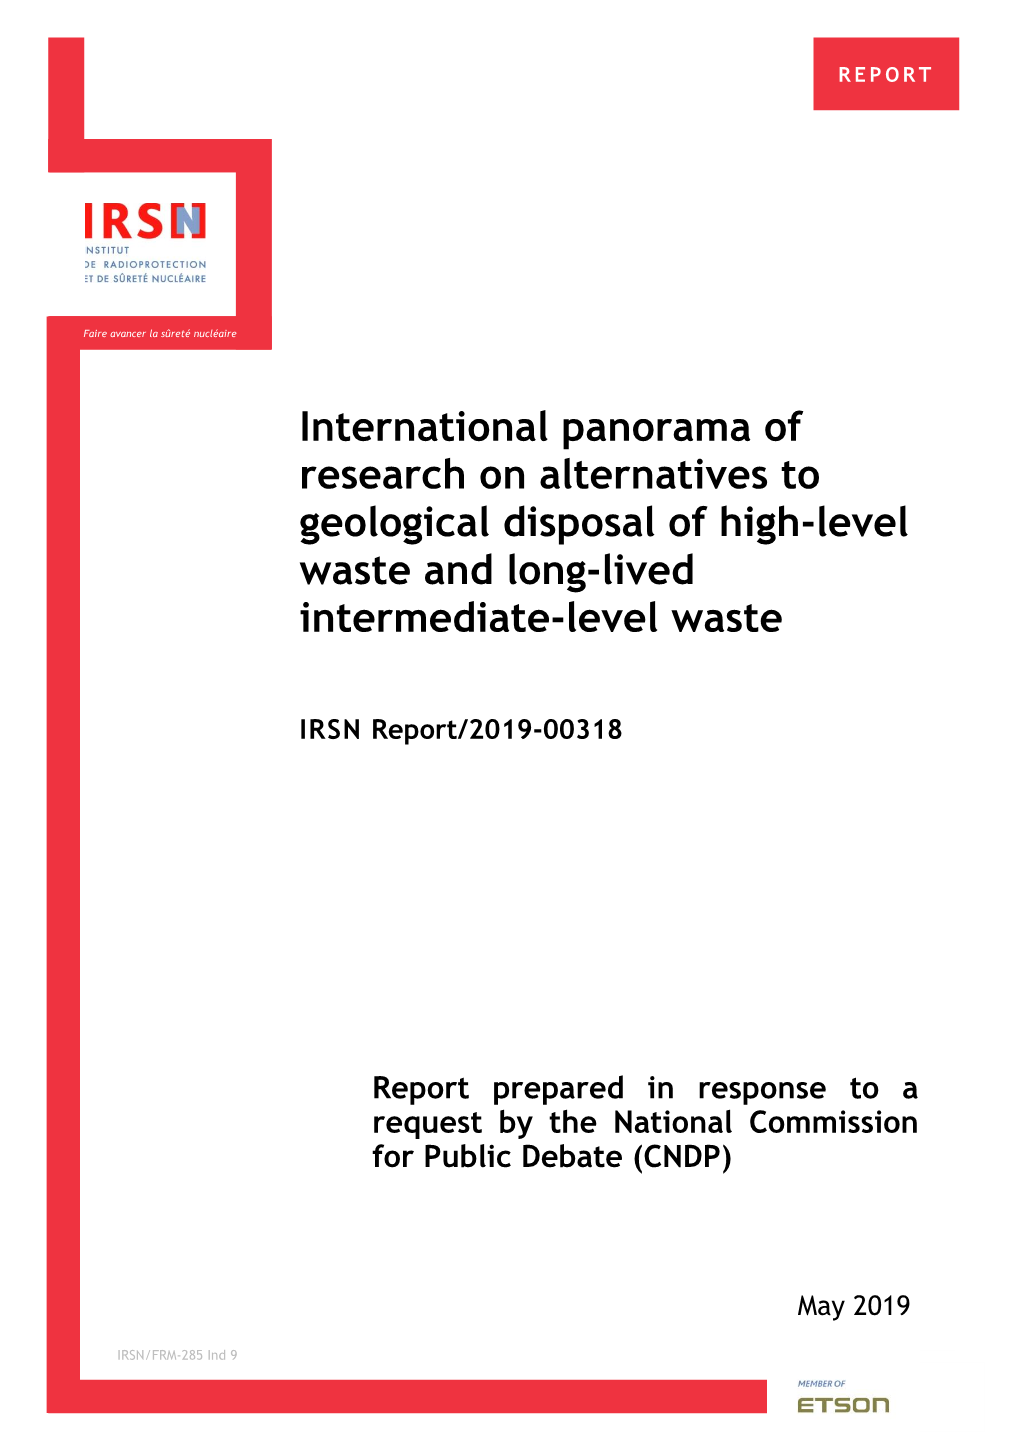 International Panorama of Research on Alternatives to Geological Disposal of High-Level Waste and Long-Lived Intermediate-Level Waste